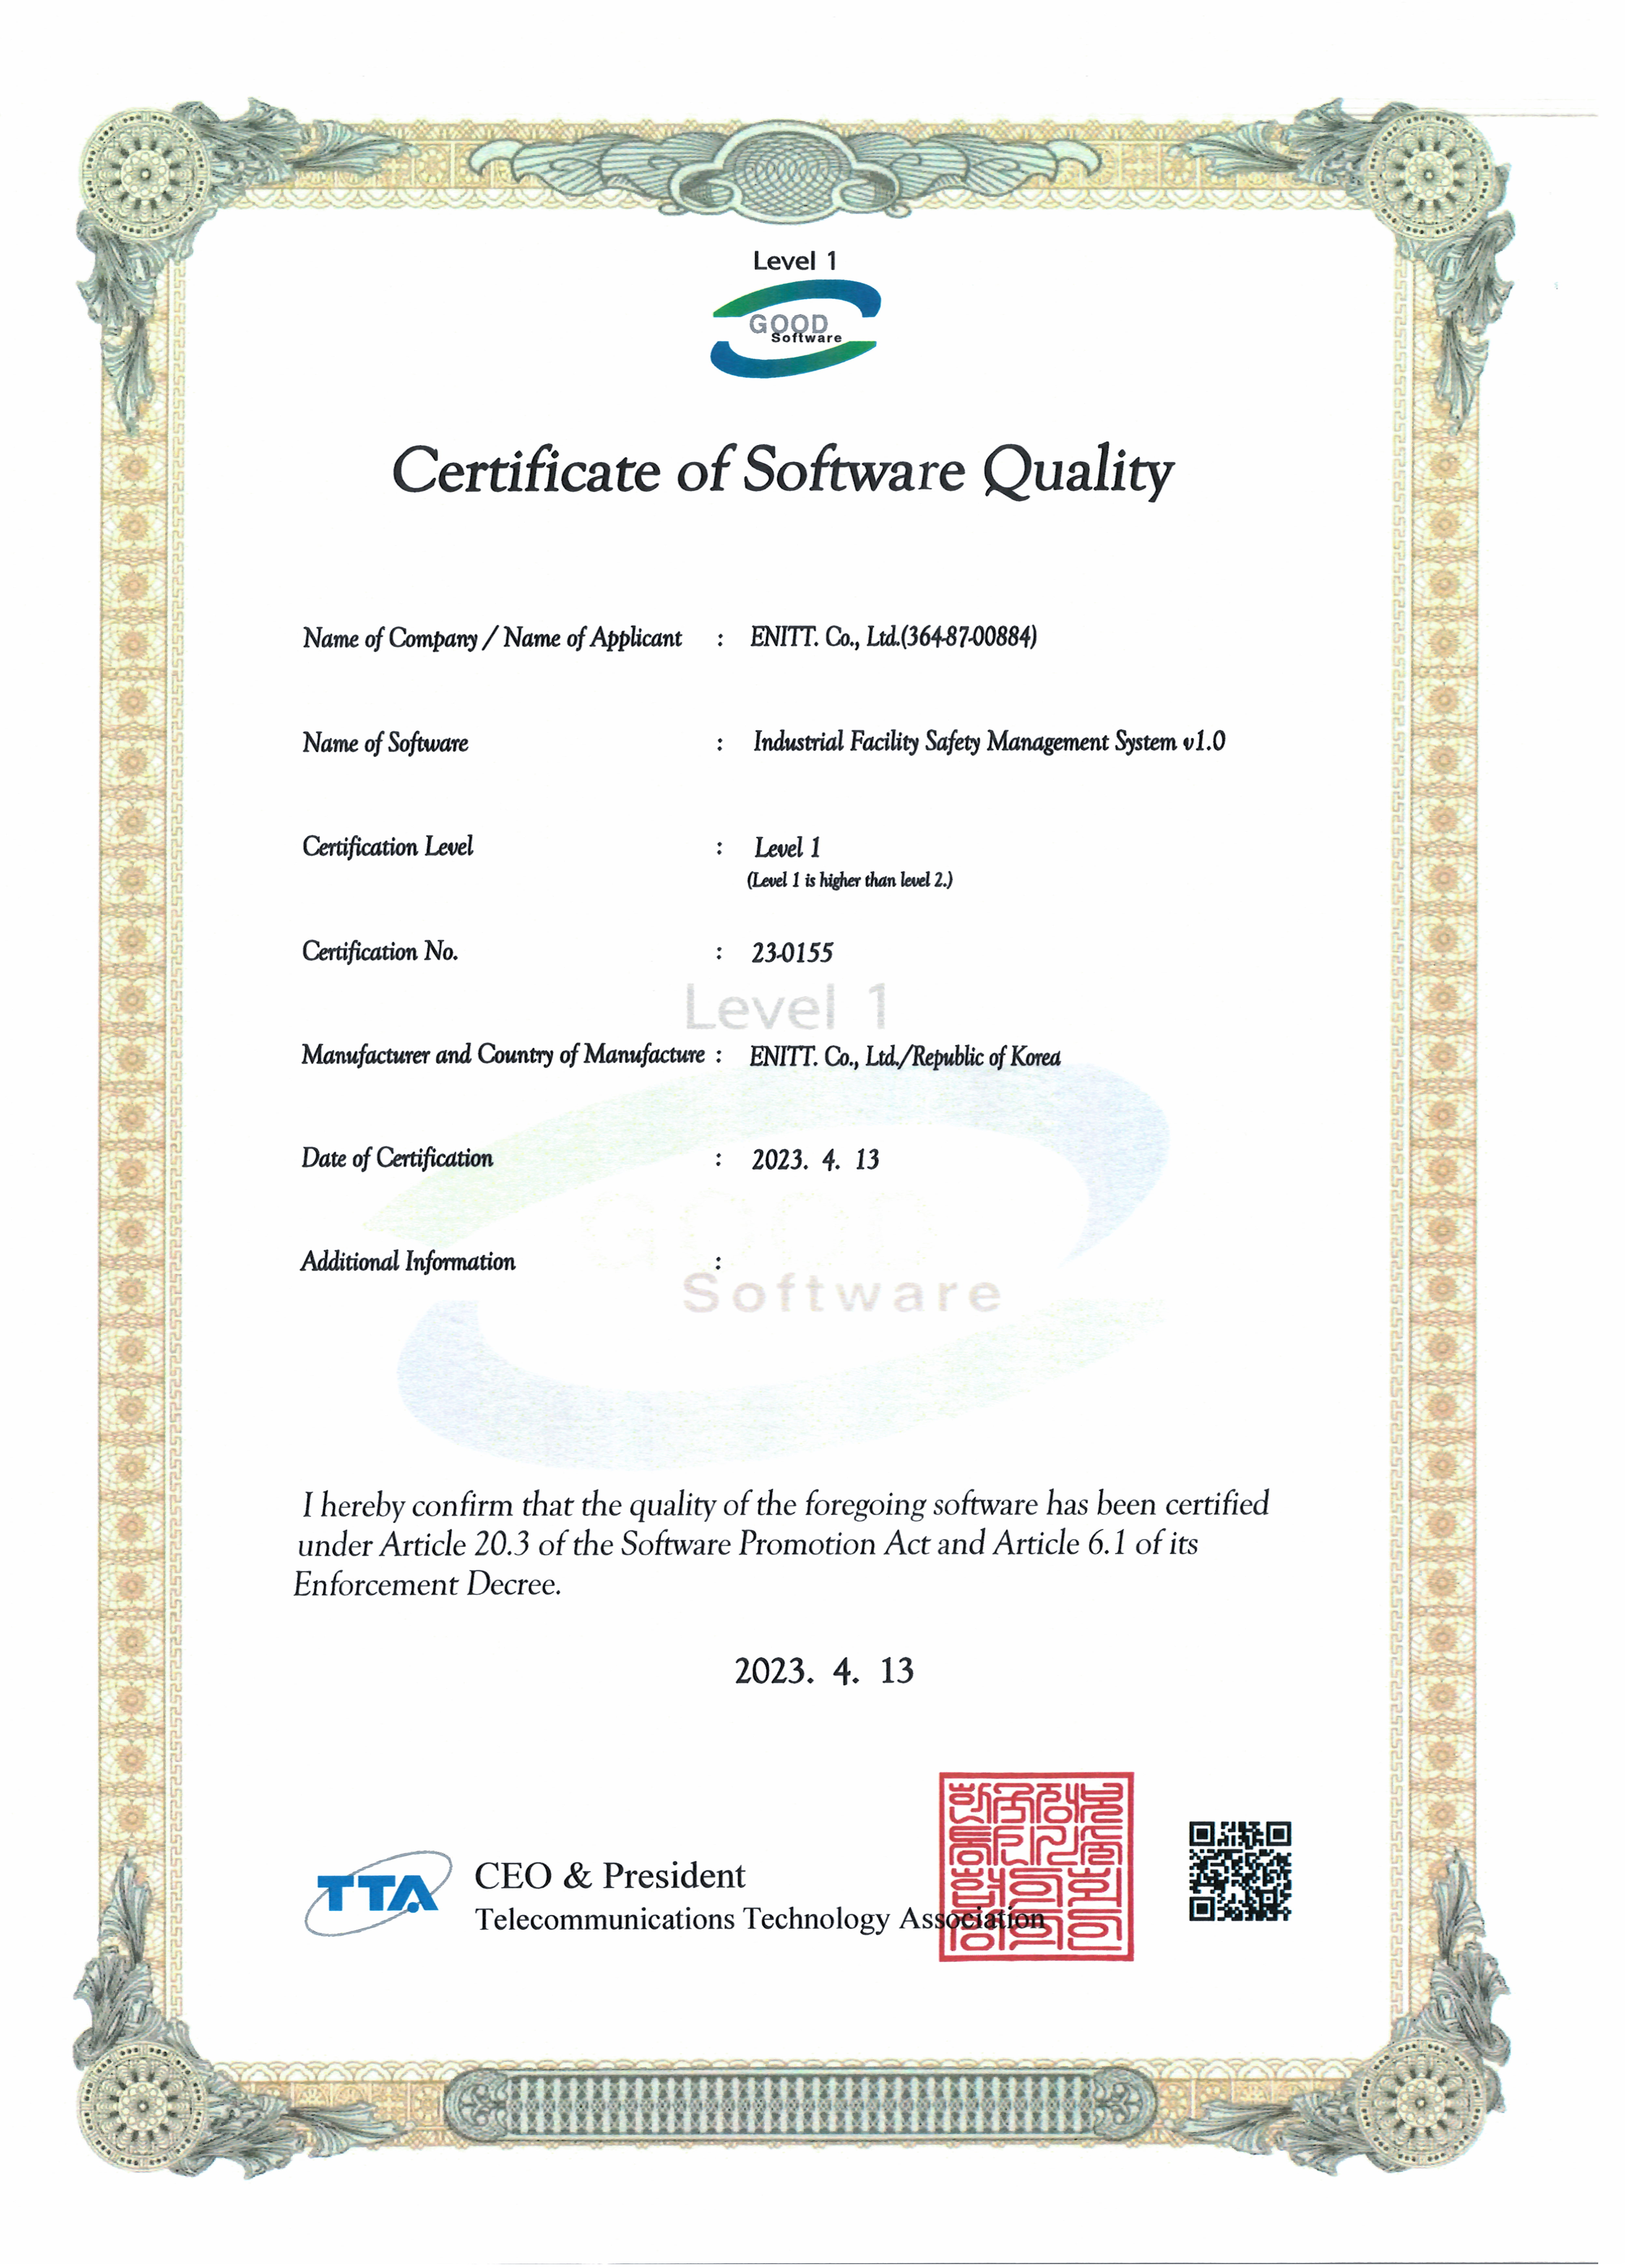 [Software Quality Certificate] Industrial Facility Safety Management System v1.0